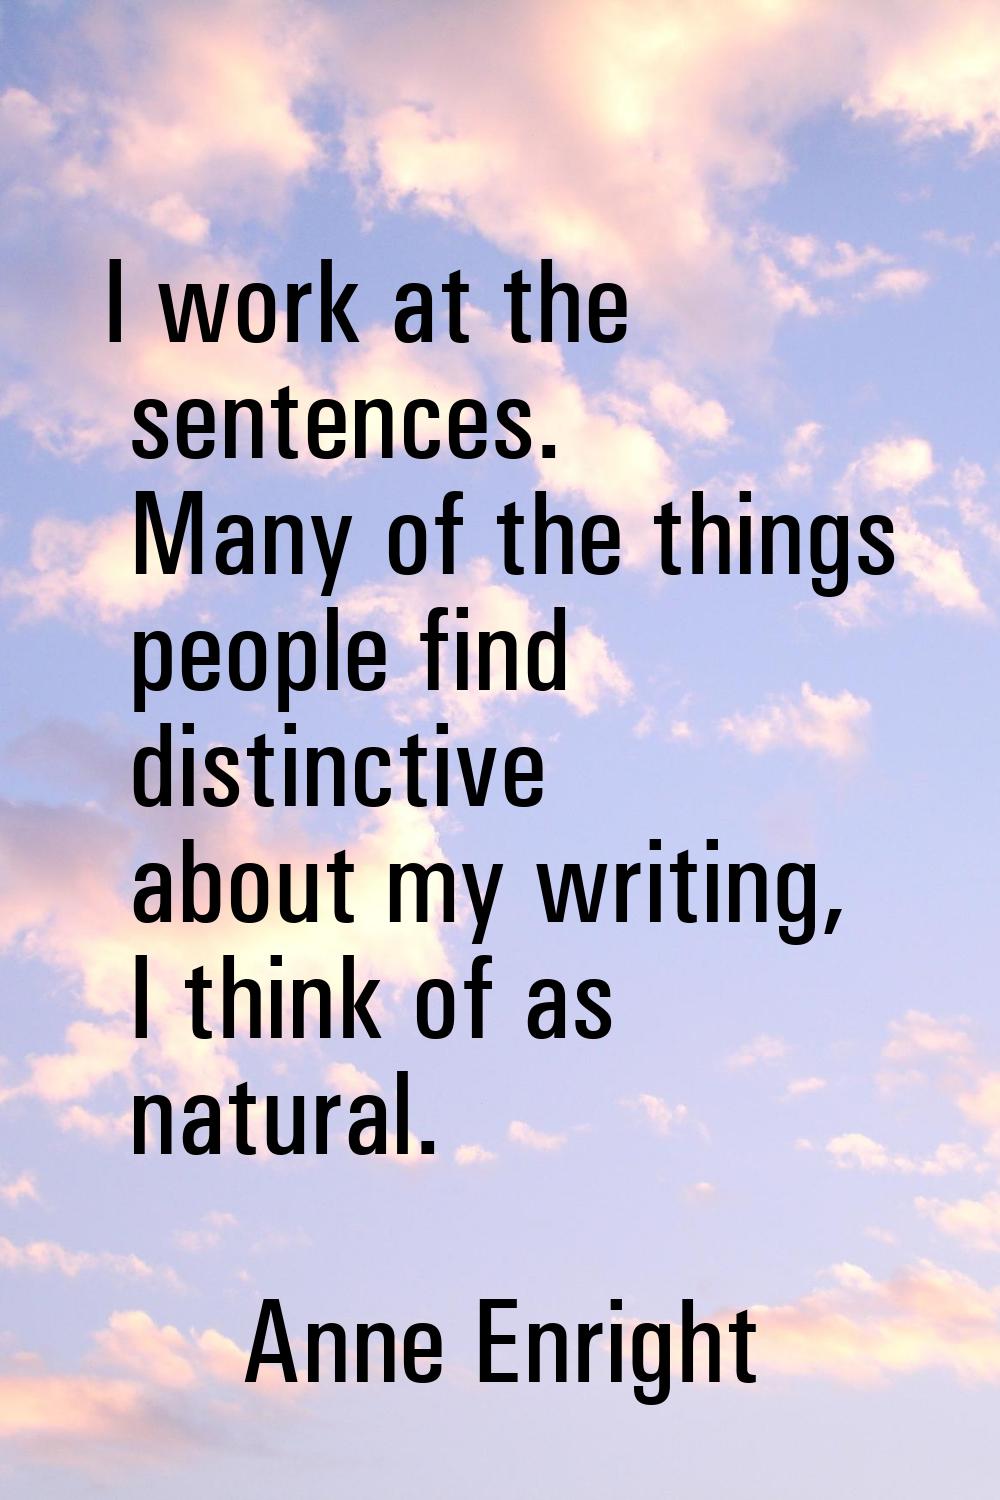 I work at the sentences. Many of the things people find distinctive about my writing, I think of as